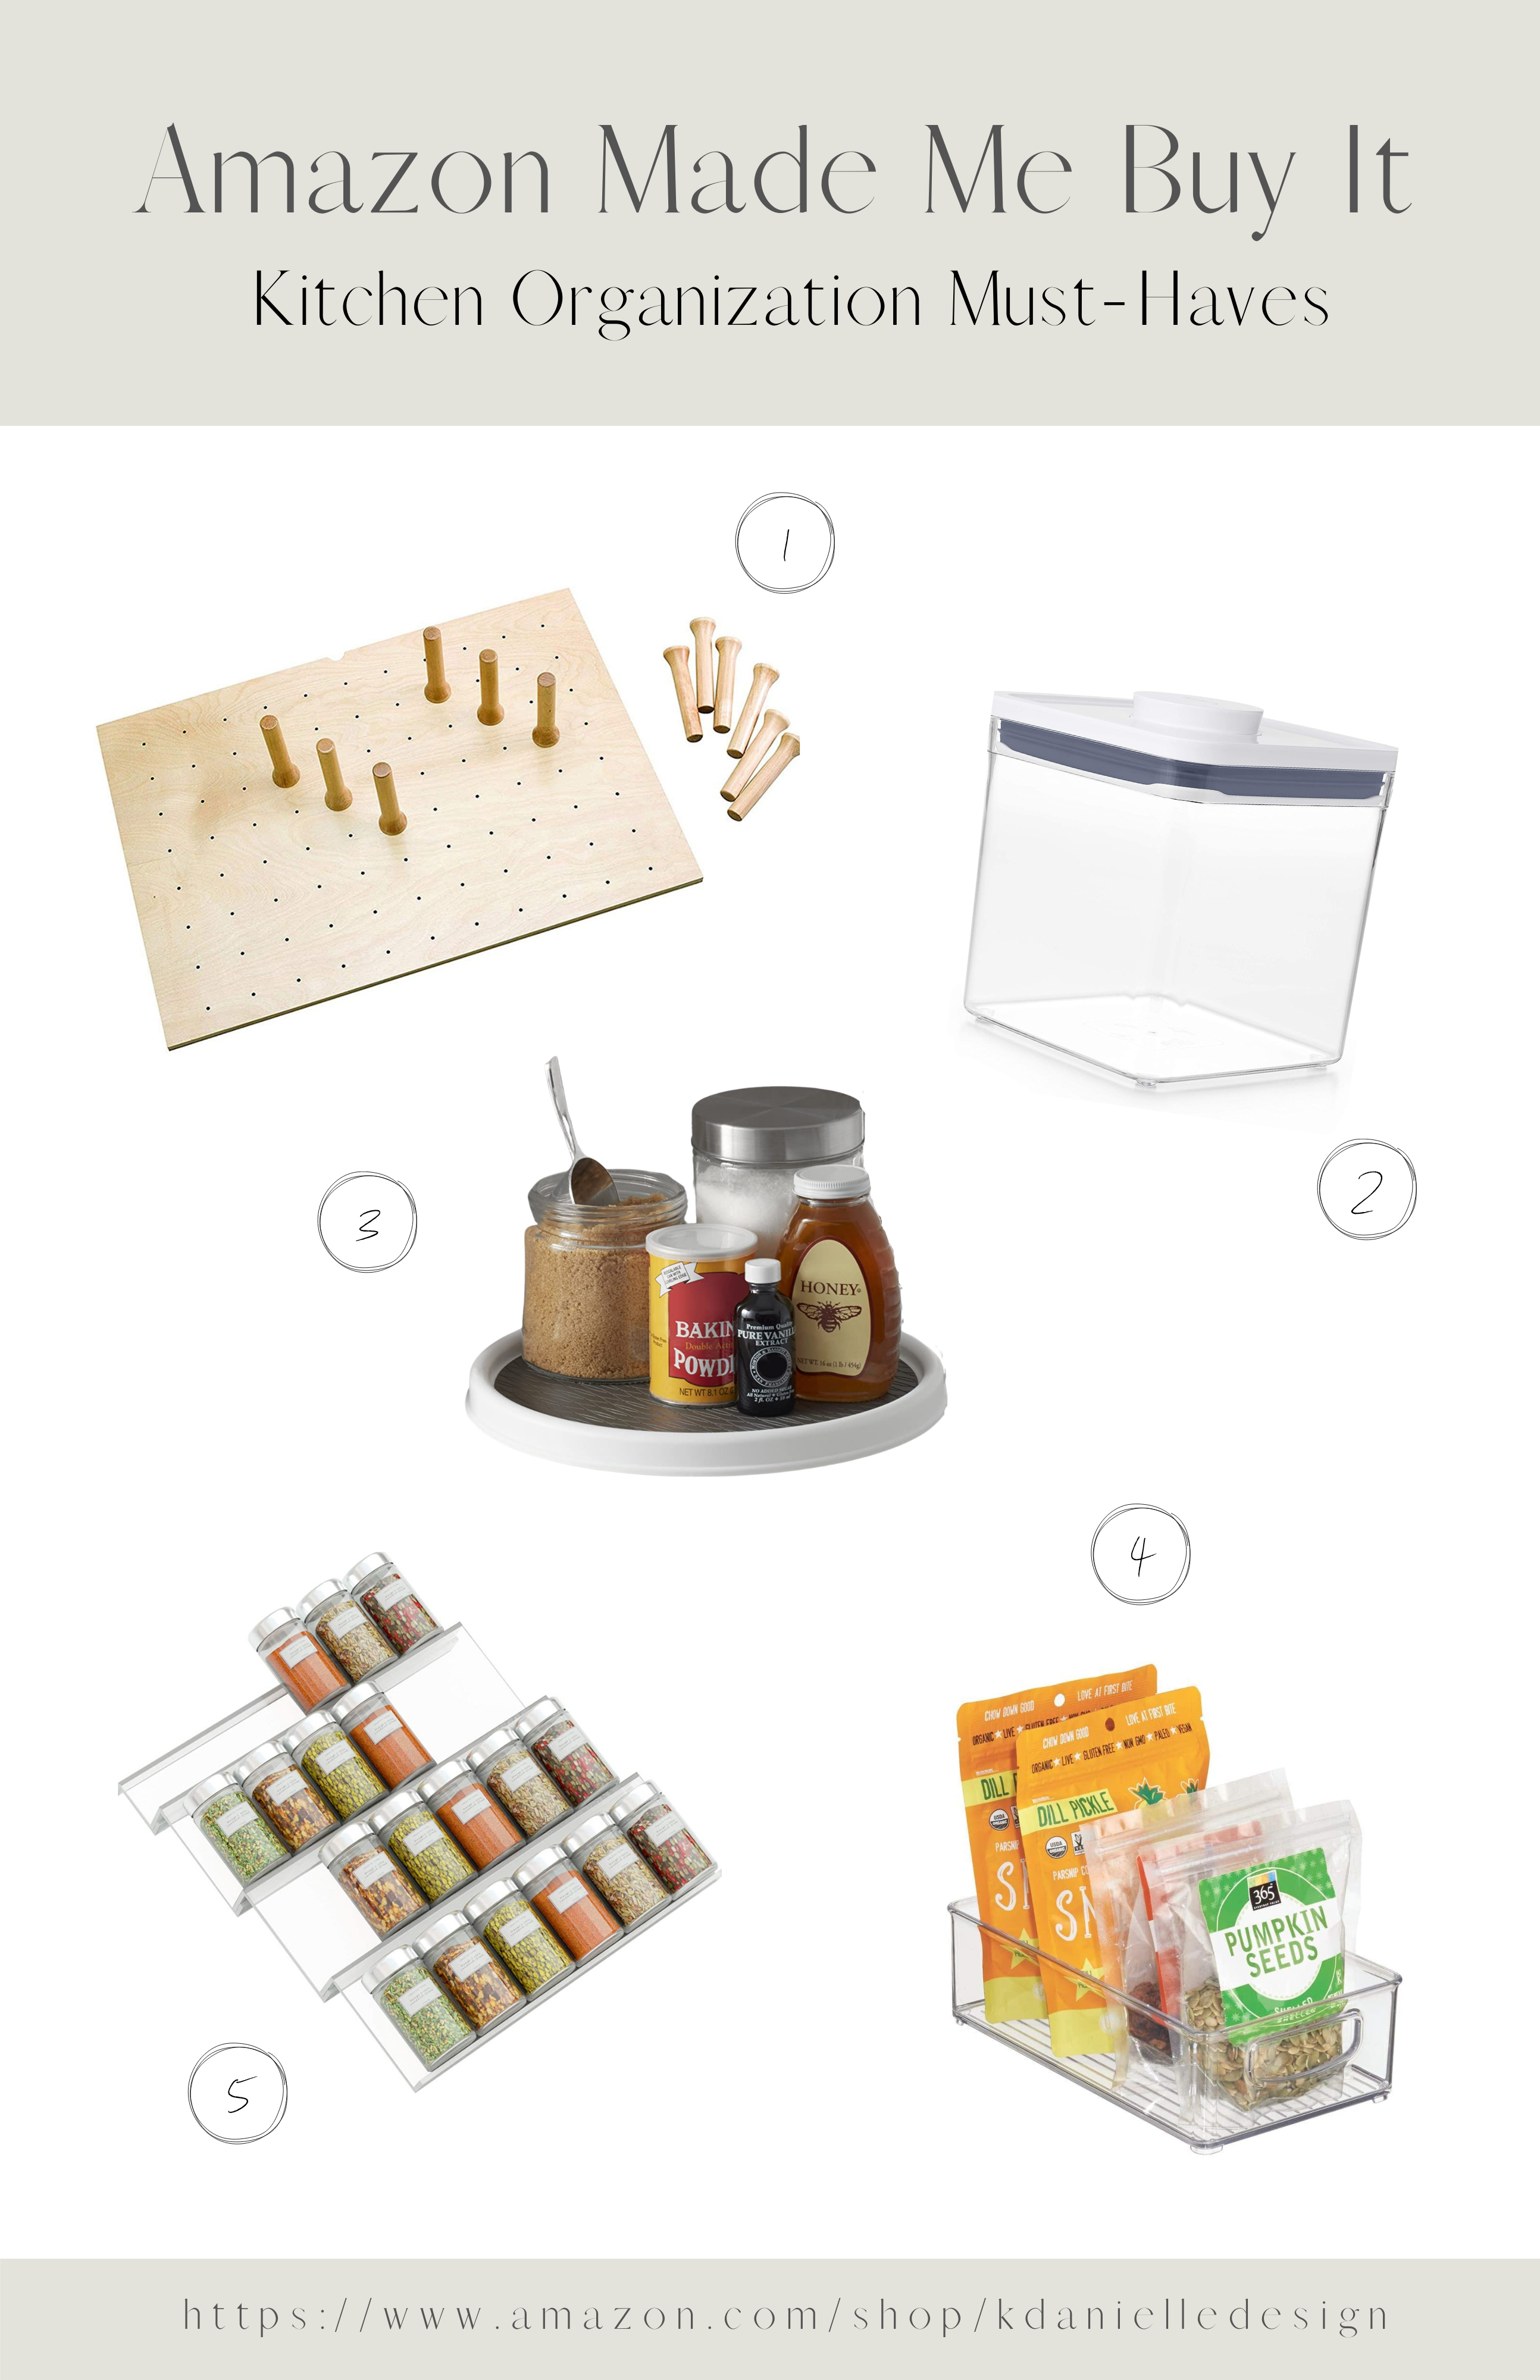 Amazon Made Me Buy It: Pantry Organization Must-Haves